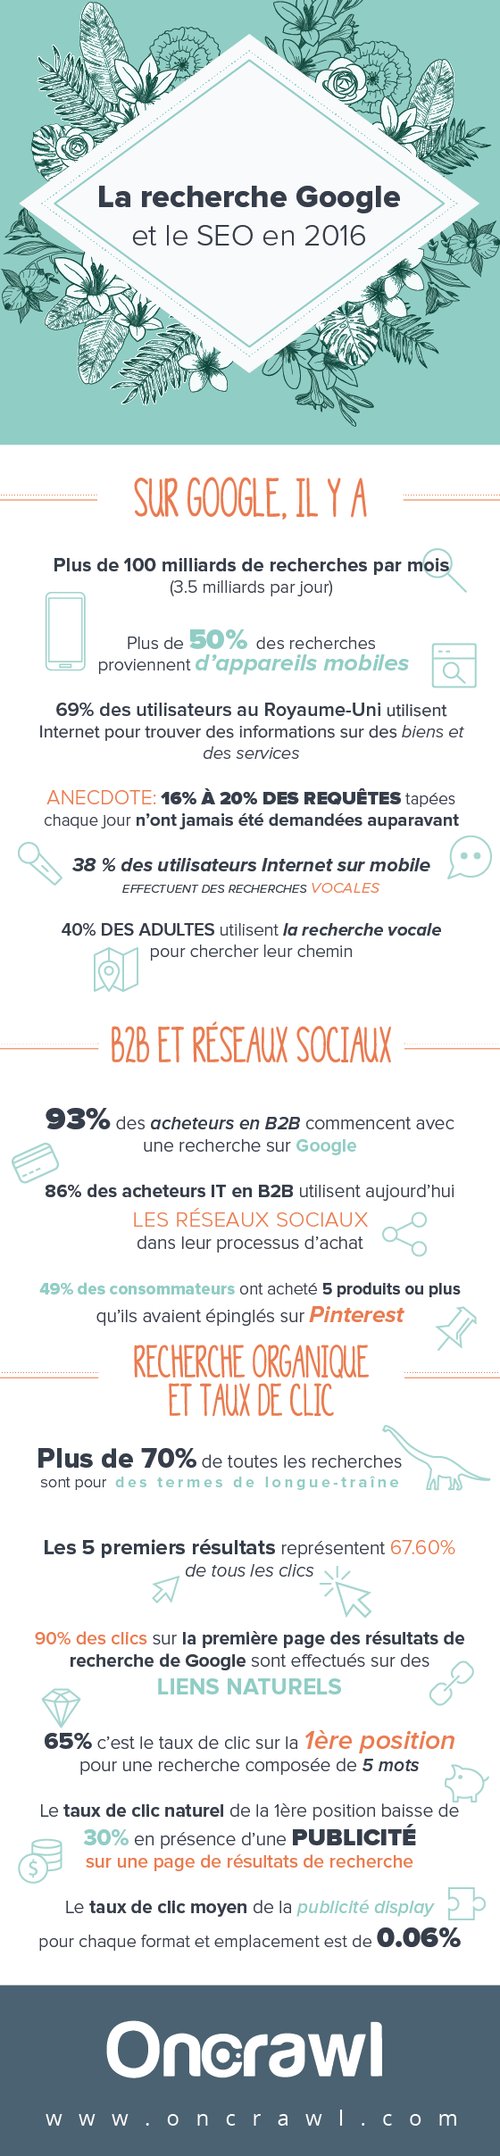 infographie-chiffres-seo-2016.png